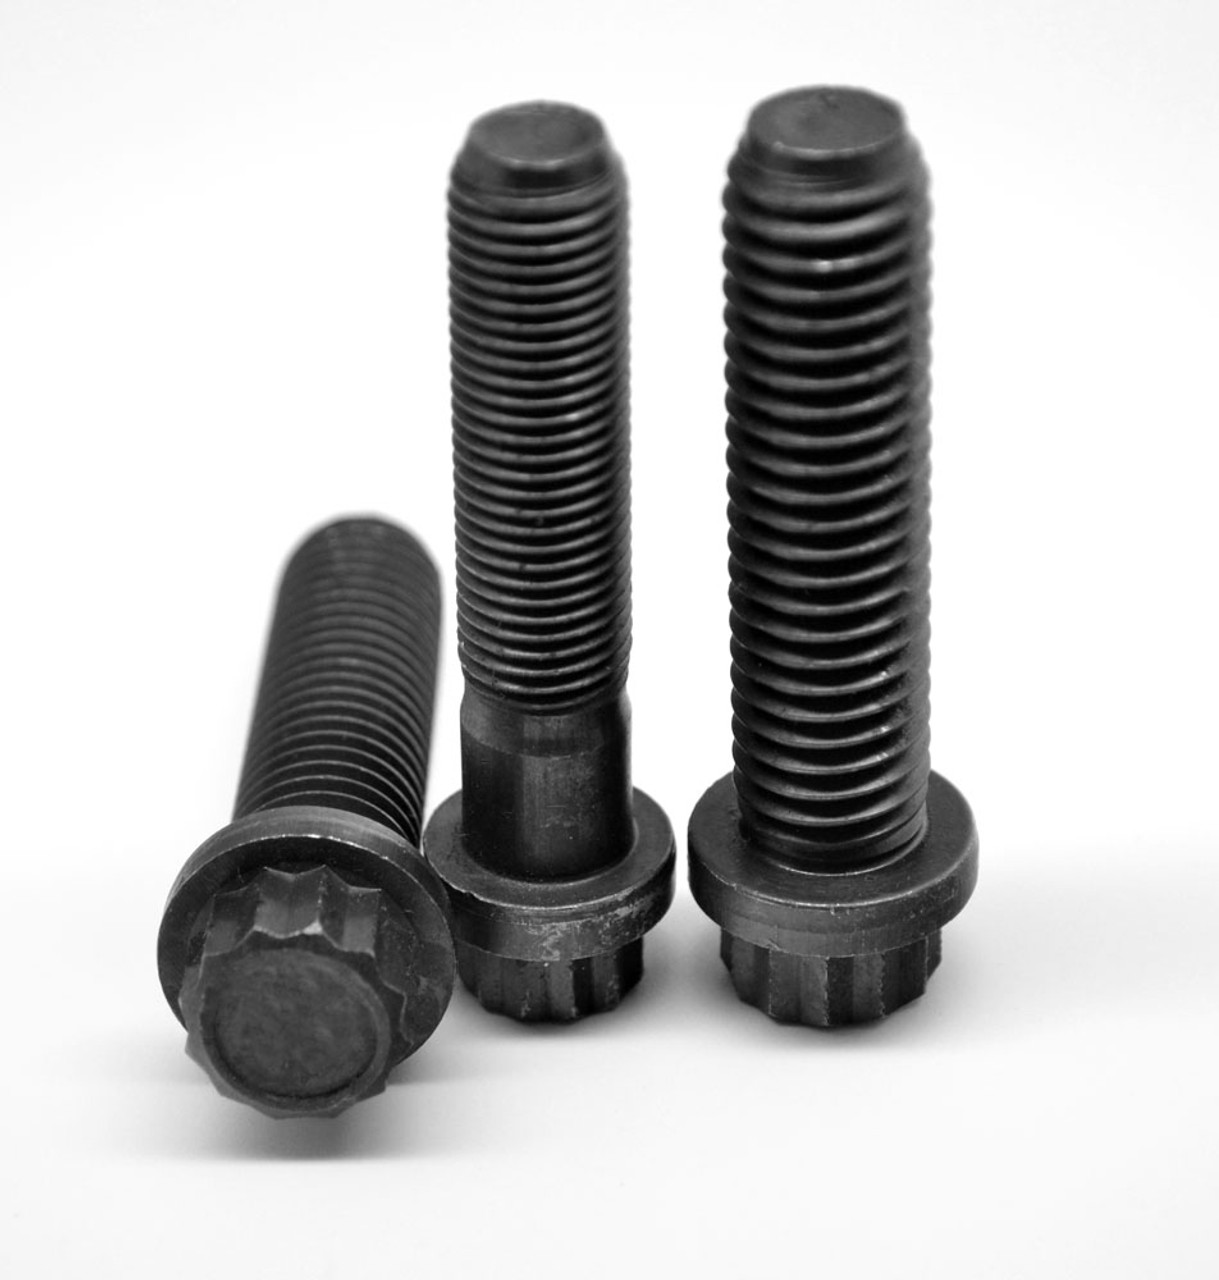 7/16-14 x 3 Coarse Thread 12-Point Flange Screw Alloy Steel Thermal Black Oxide